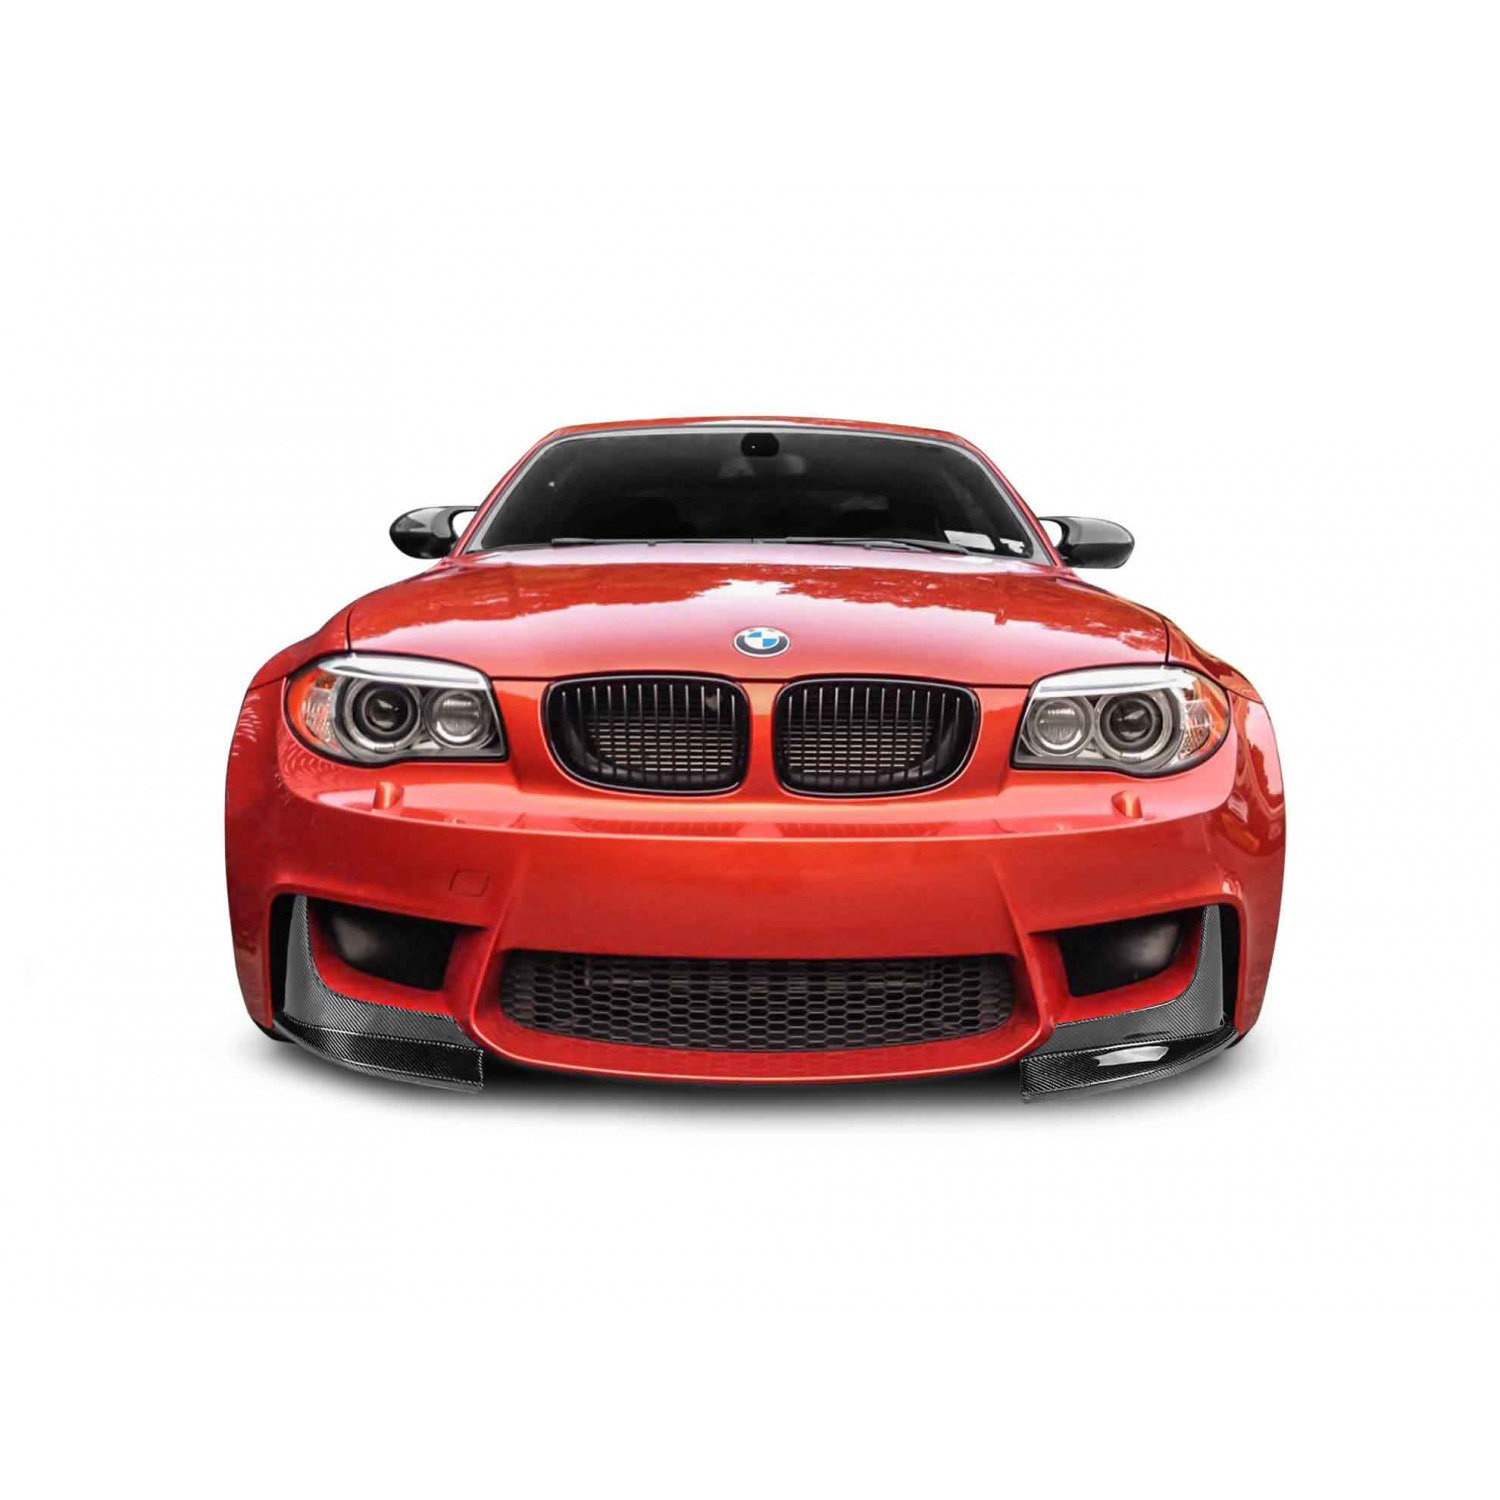 https://www.carbonstar.de/media/image/product/13433/md/cstar-carbon-gfk-frontlippe-frontspoiler-splitter-flaps-aehnlich-performance-passend-fuer-bmw-e82-1m~5.jpg